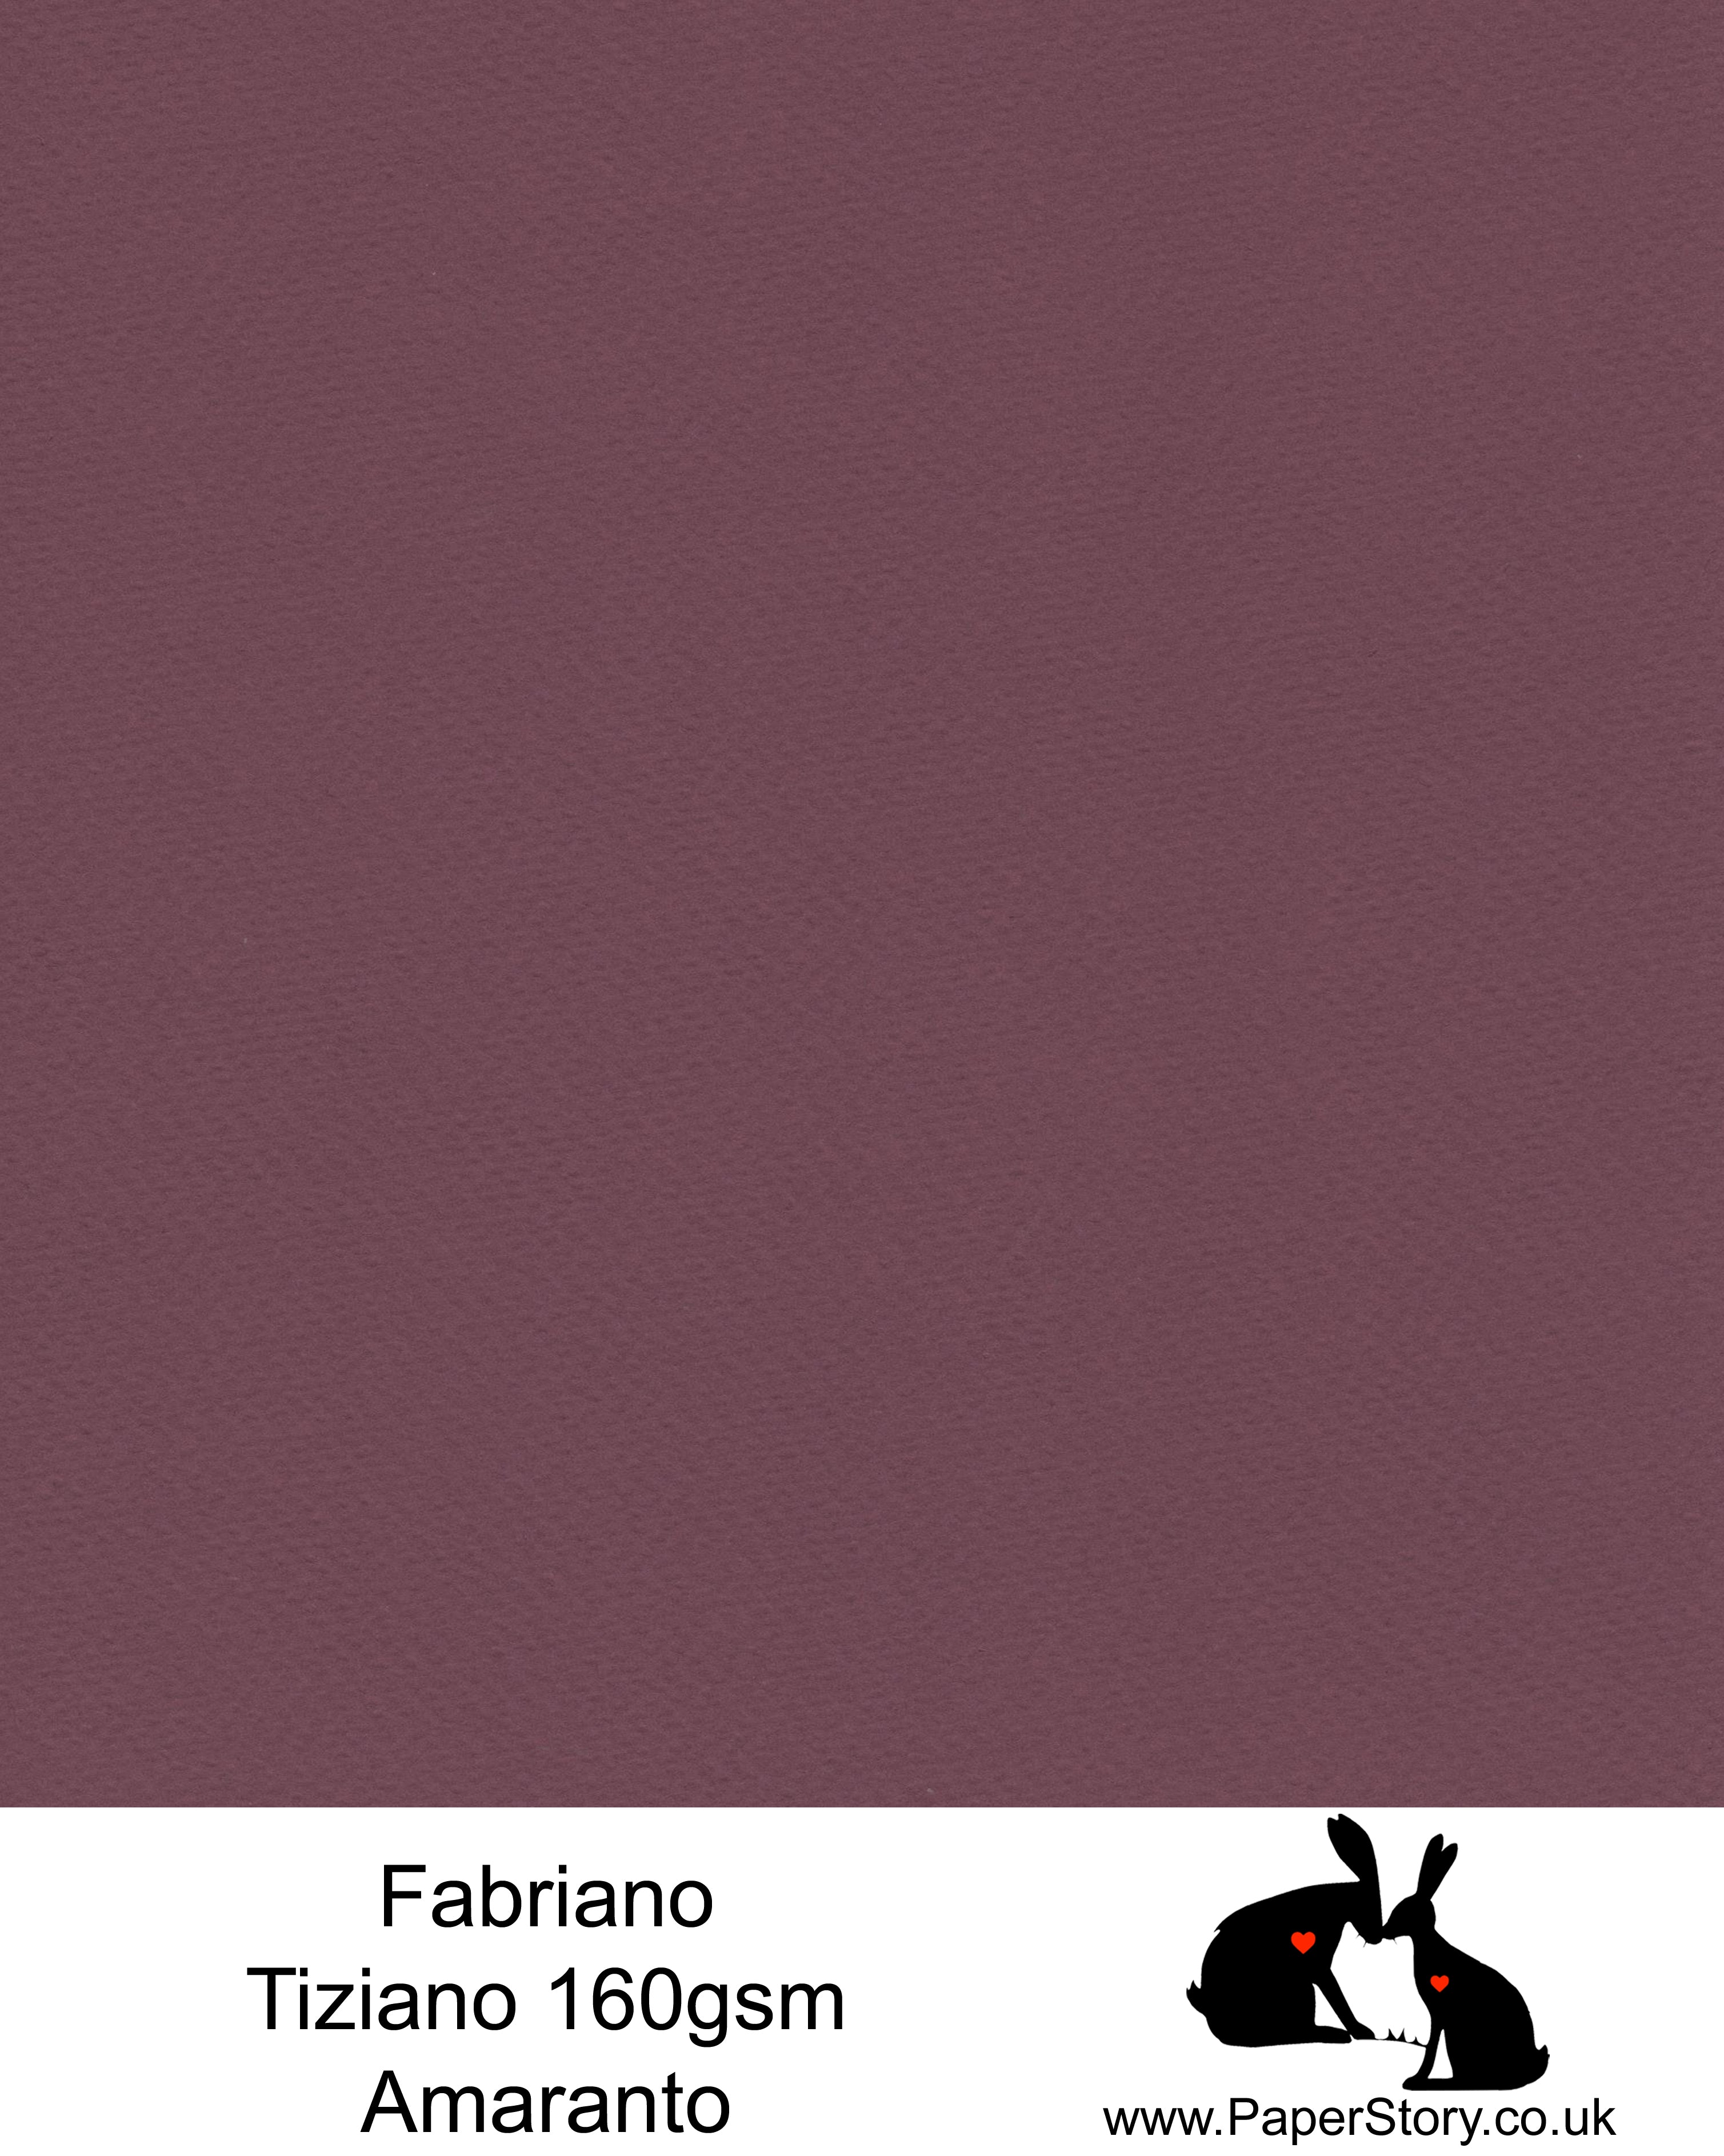 High quality paper from Italy, Amaranto, red with a hint of deep pink Fabriano Tiziano is 160 gsm, Tiziano has a high cotton content, a textured naturally sized surface. This paper is acid free to guarantee long permanence in time, pH neutral. It has highly lightfast colours, an excellent surface making and sizing which make this paper particularly suitable for papercutting, pastels, pencil, graphite, charcoal, tempera, air brush and watercolour techniques. Tiziano can be used for all printing techniques.